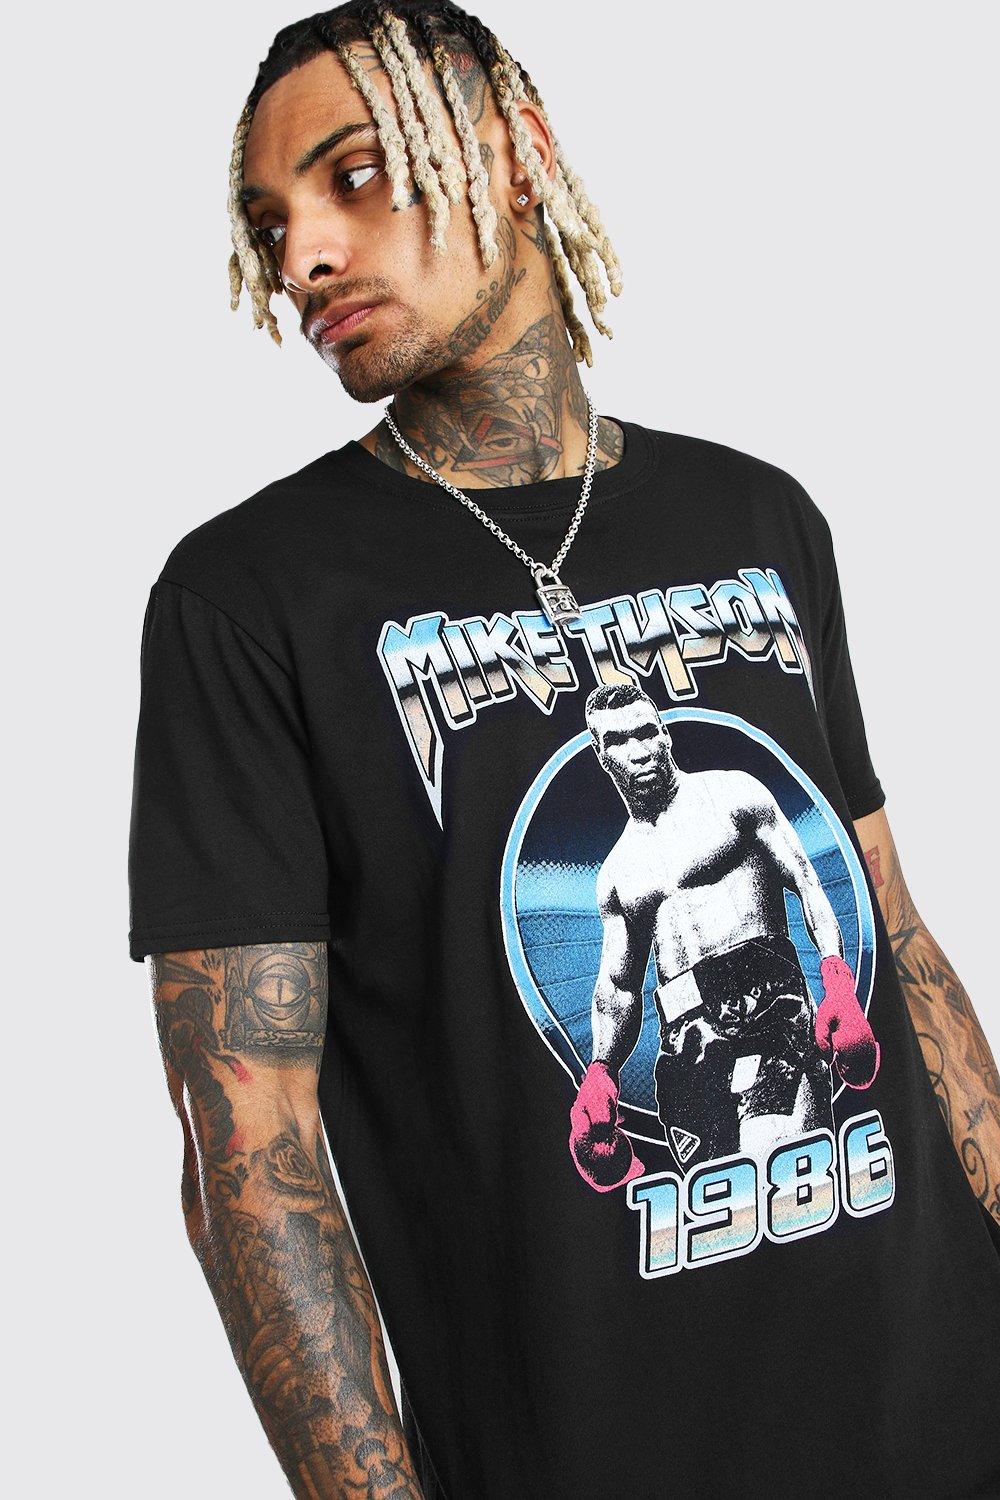 be real mike tyson shirt